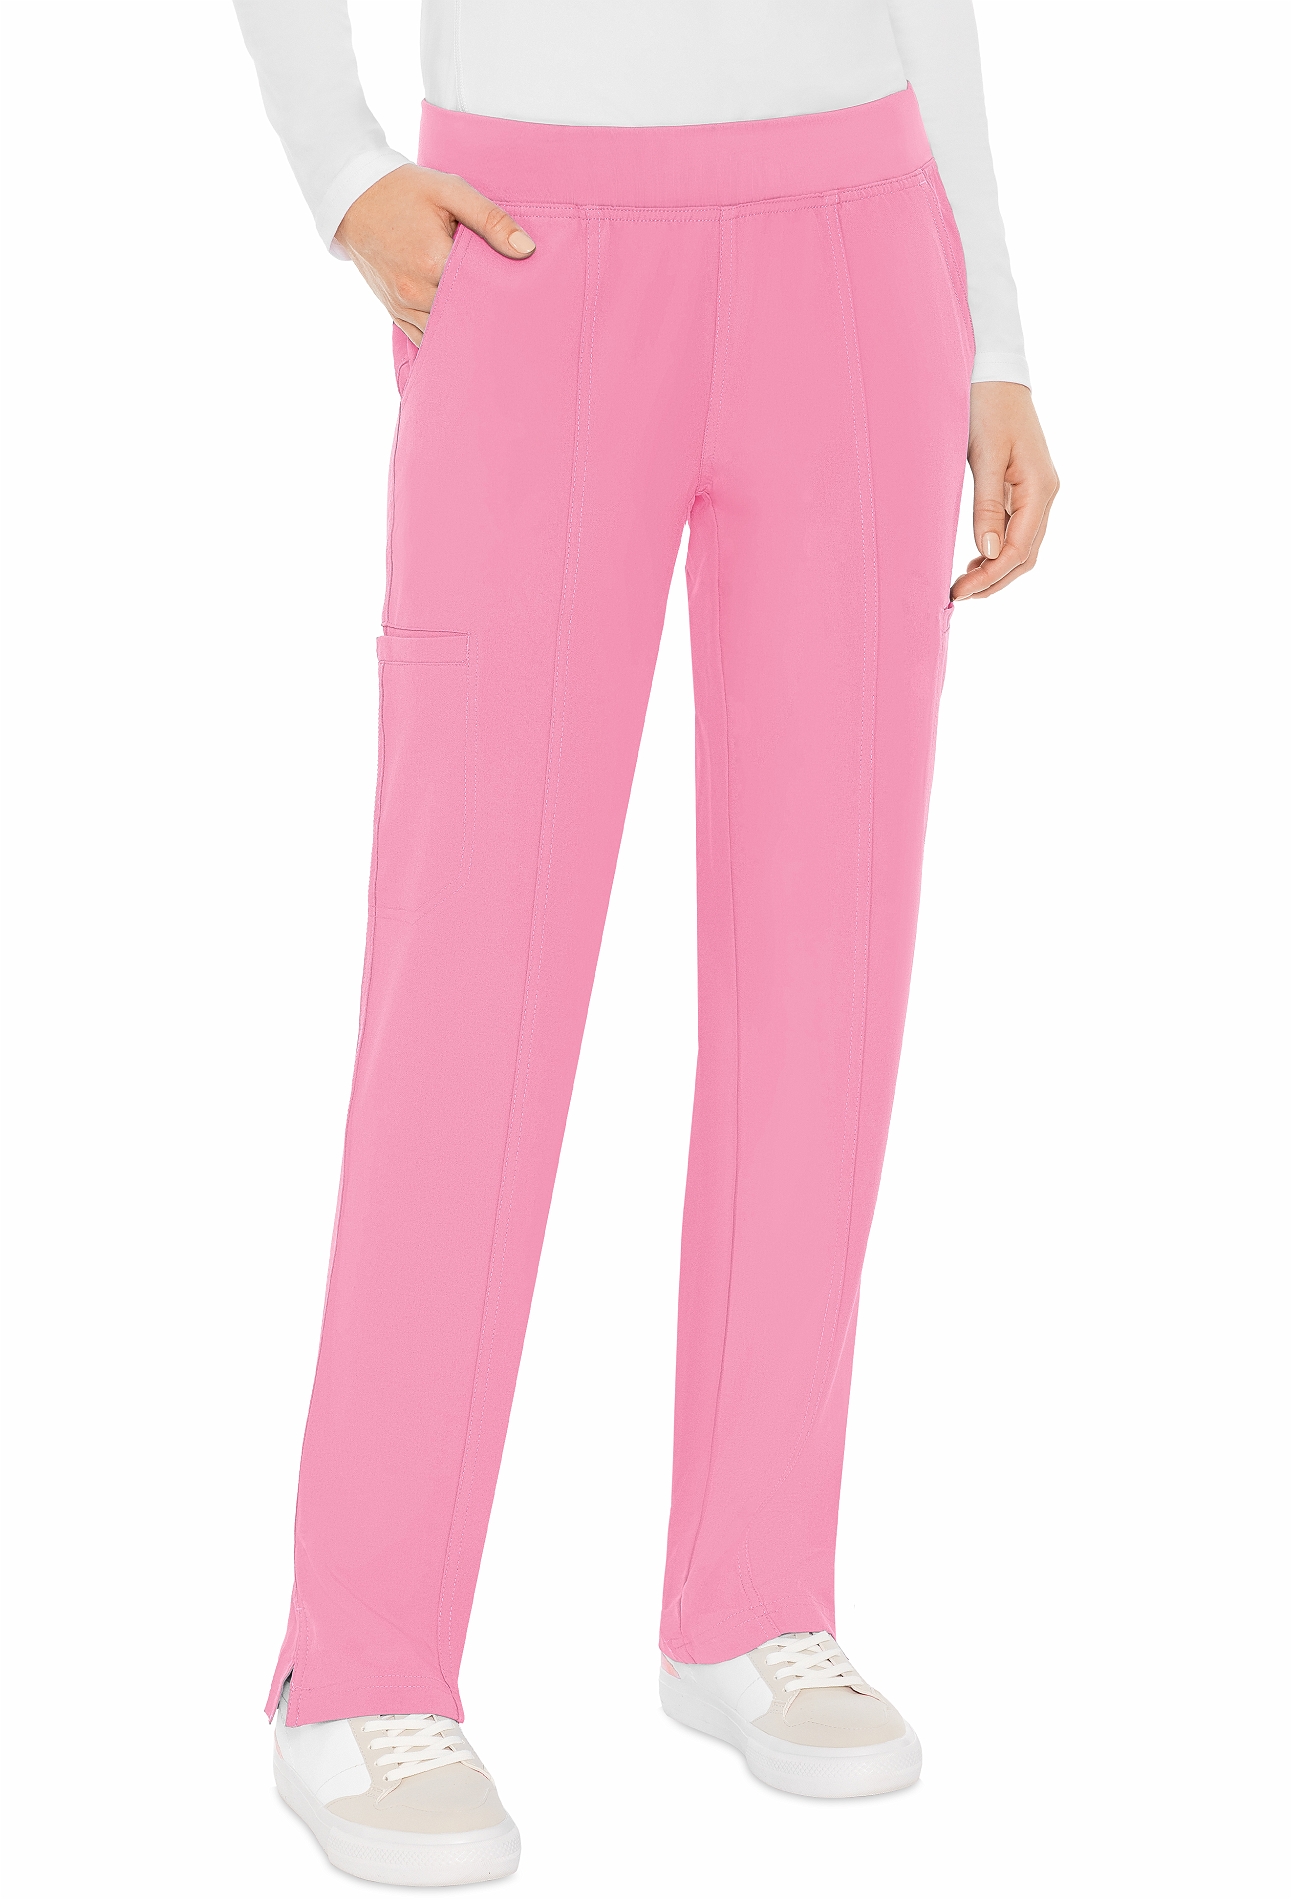 Med Couture Energy Women's Yoga Comfort Cargo Paige Pant-MC8744